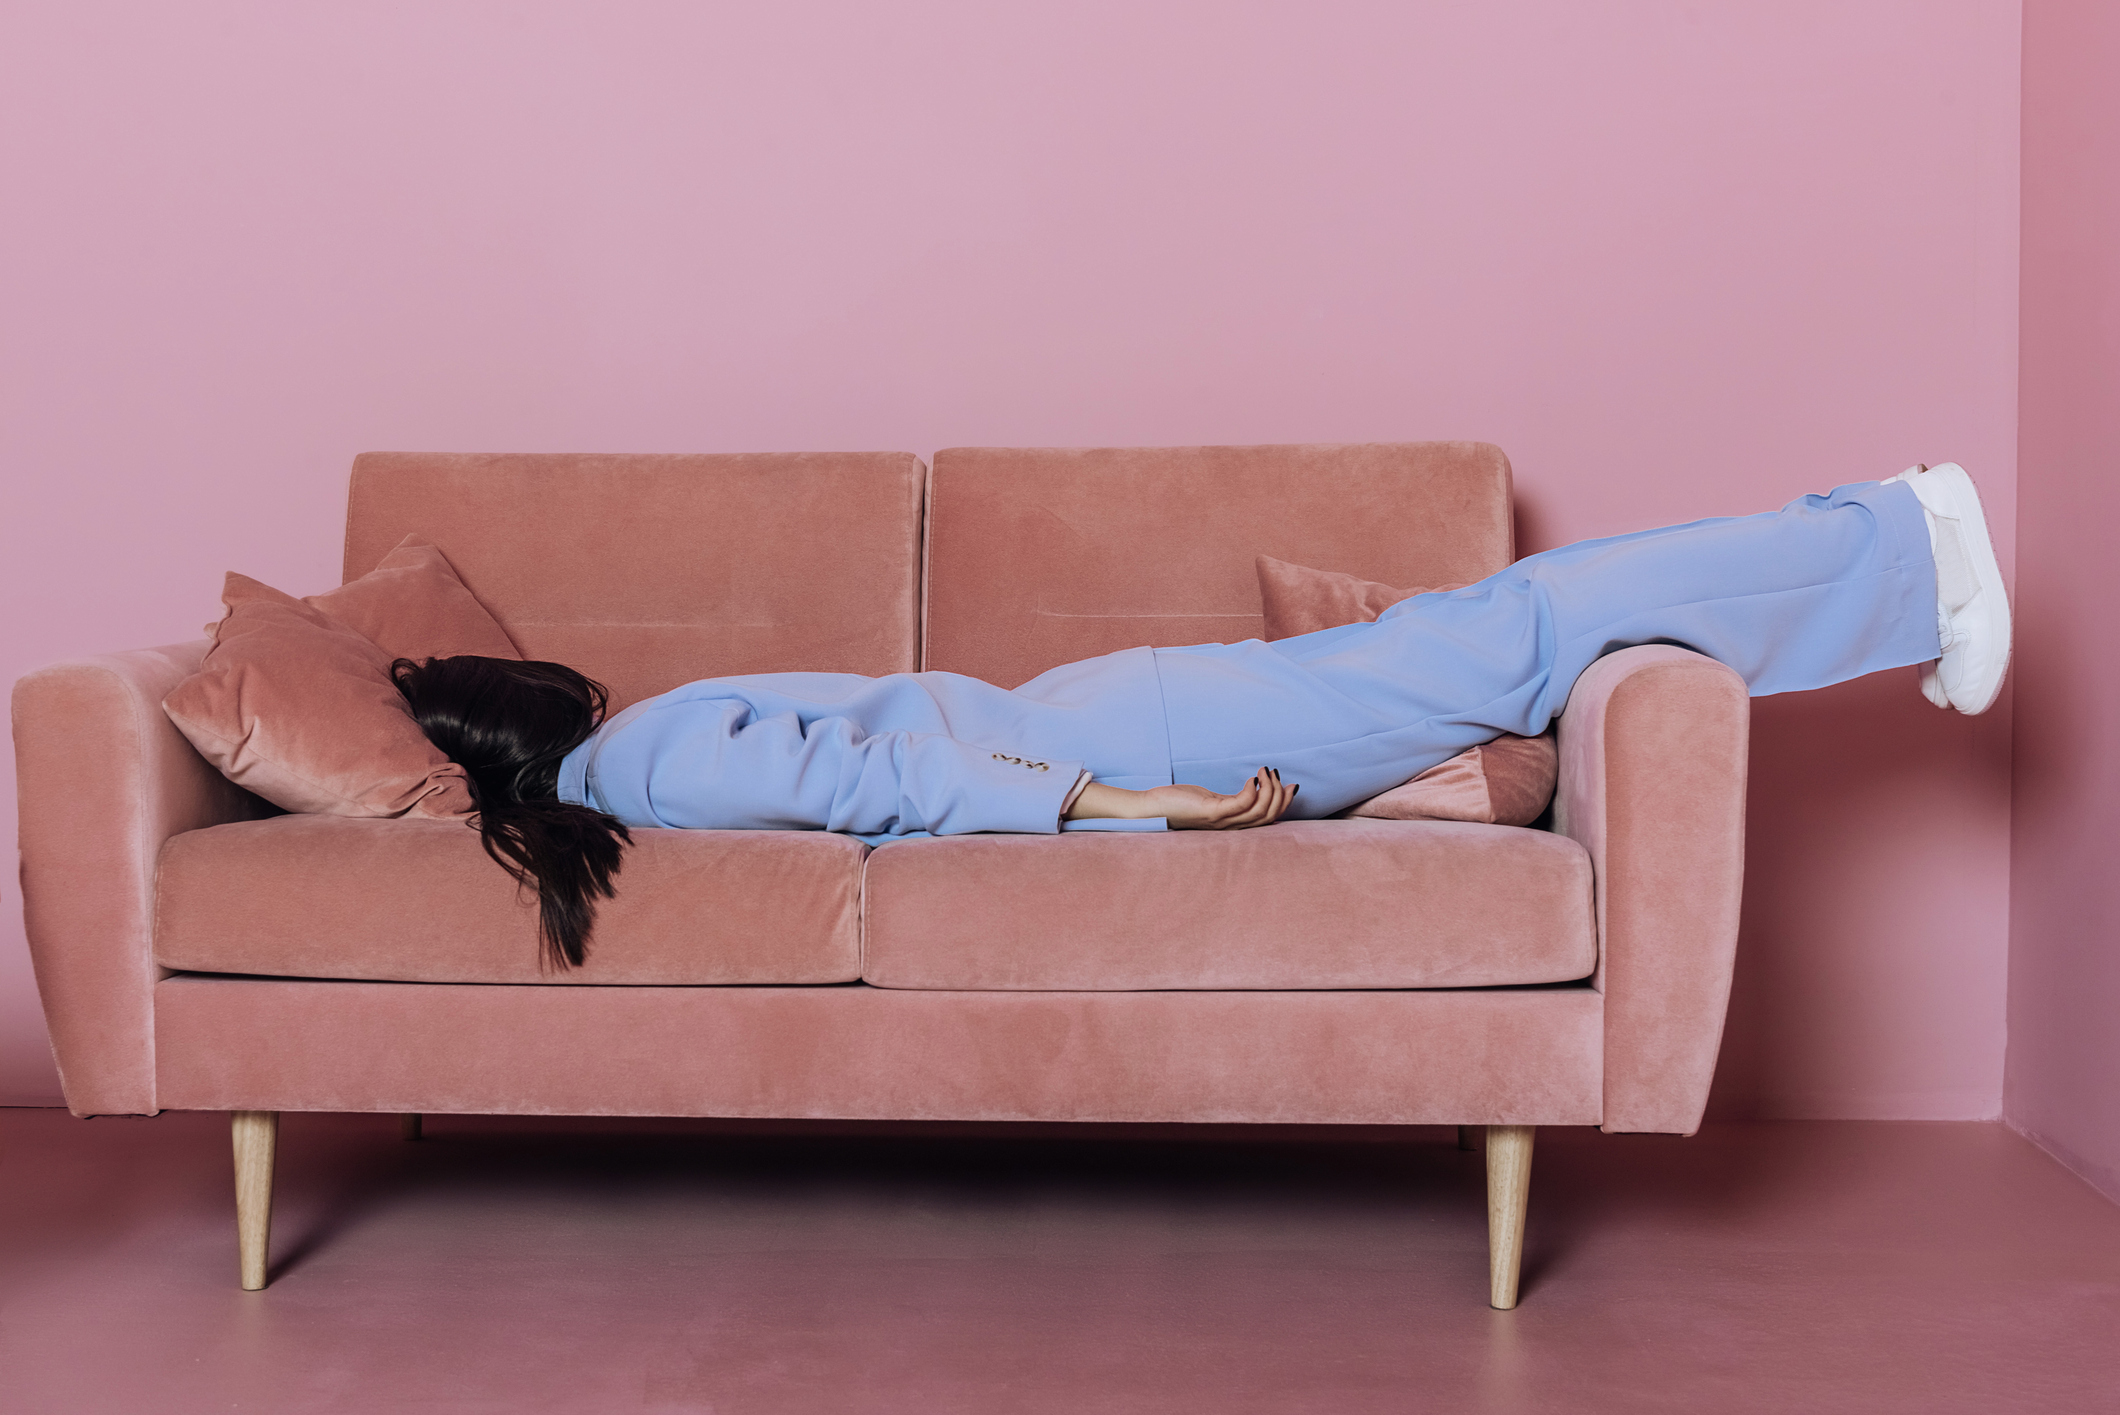 A woman lying in a blue suit on a pink sofa. 